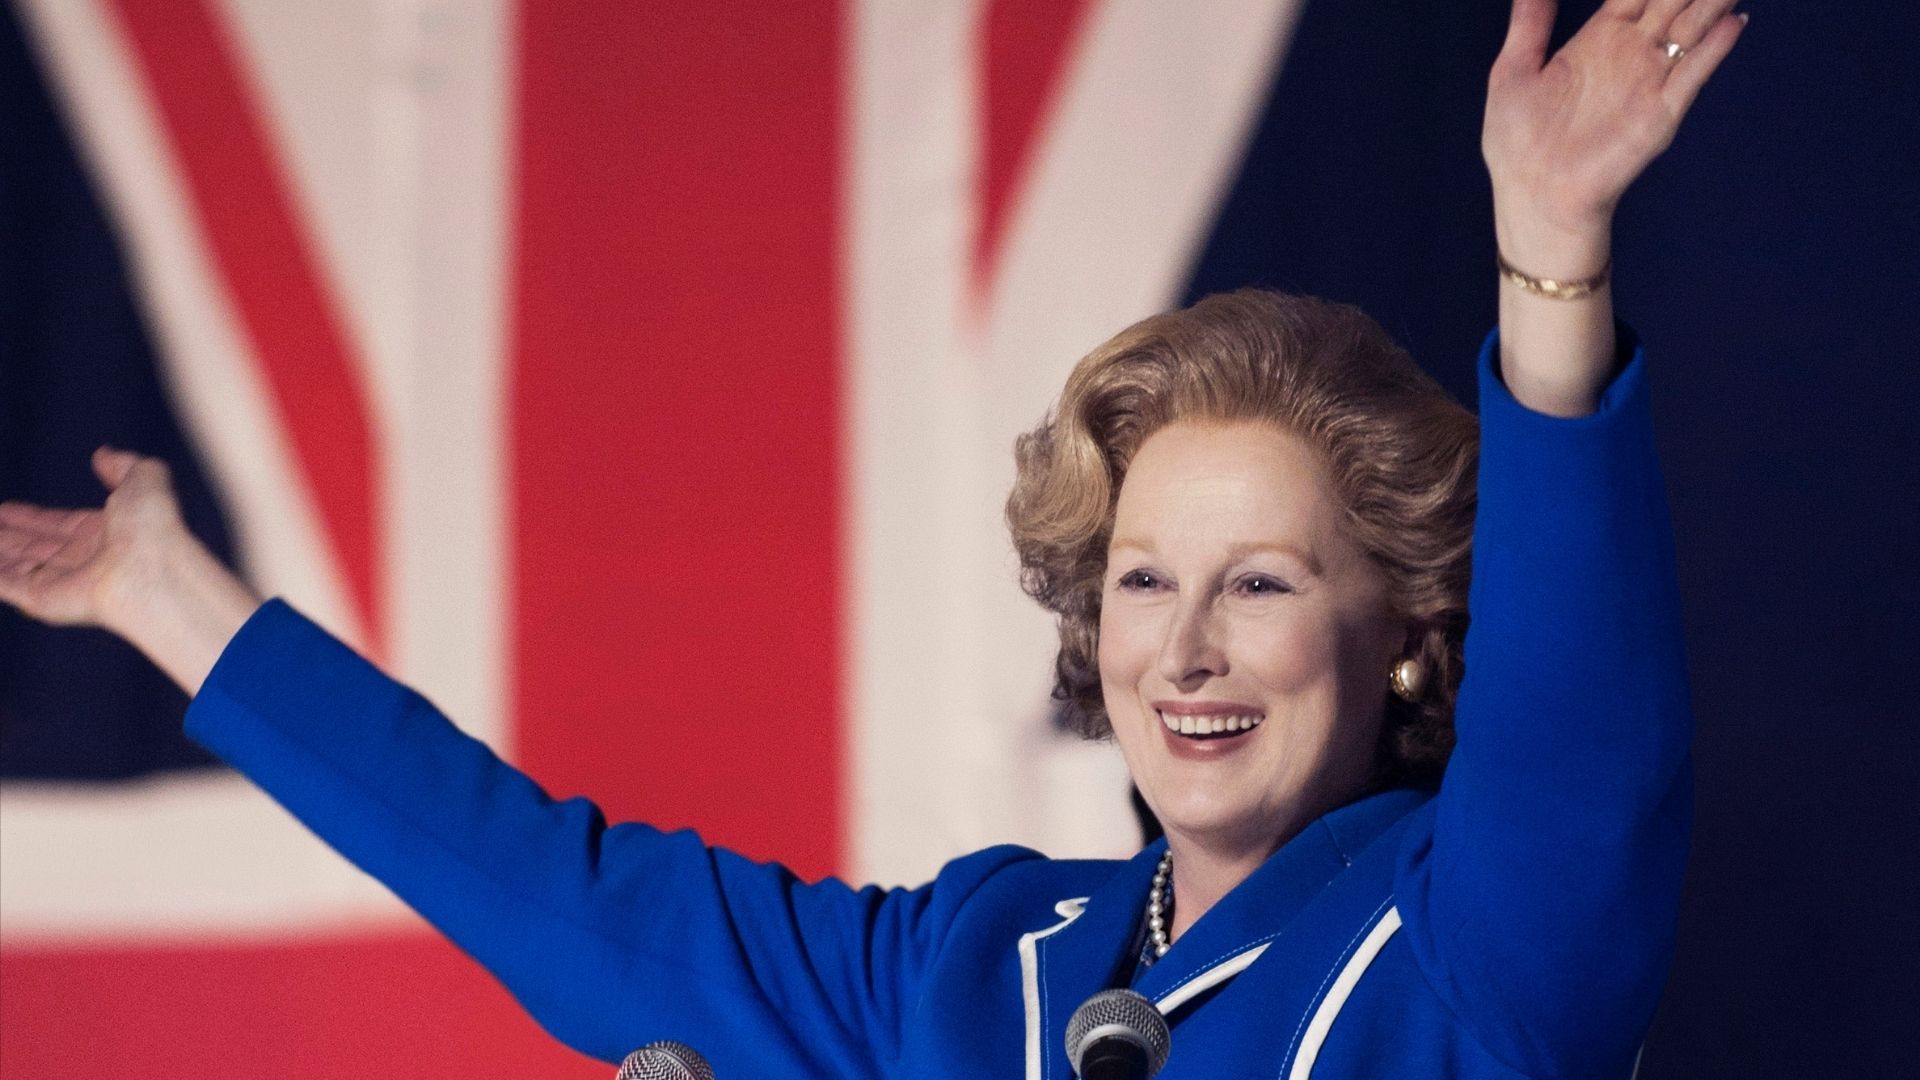 Movies to watch on International Women's Day: The Iron Lady